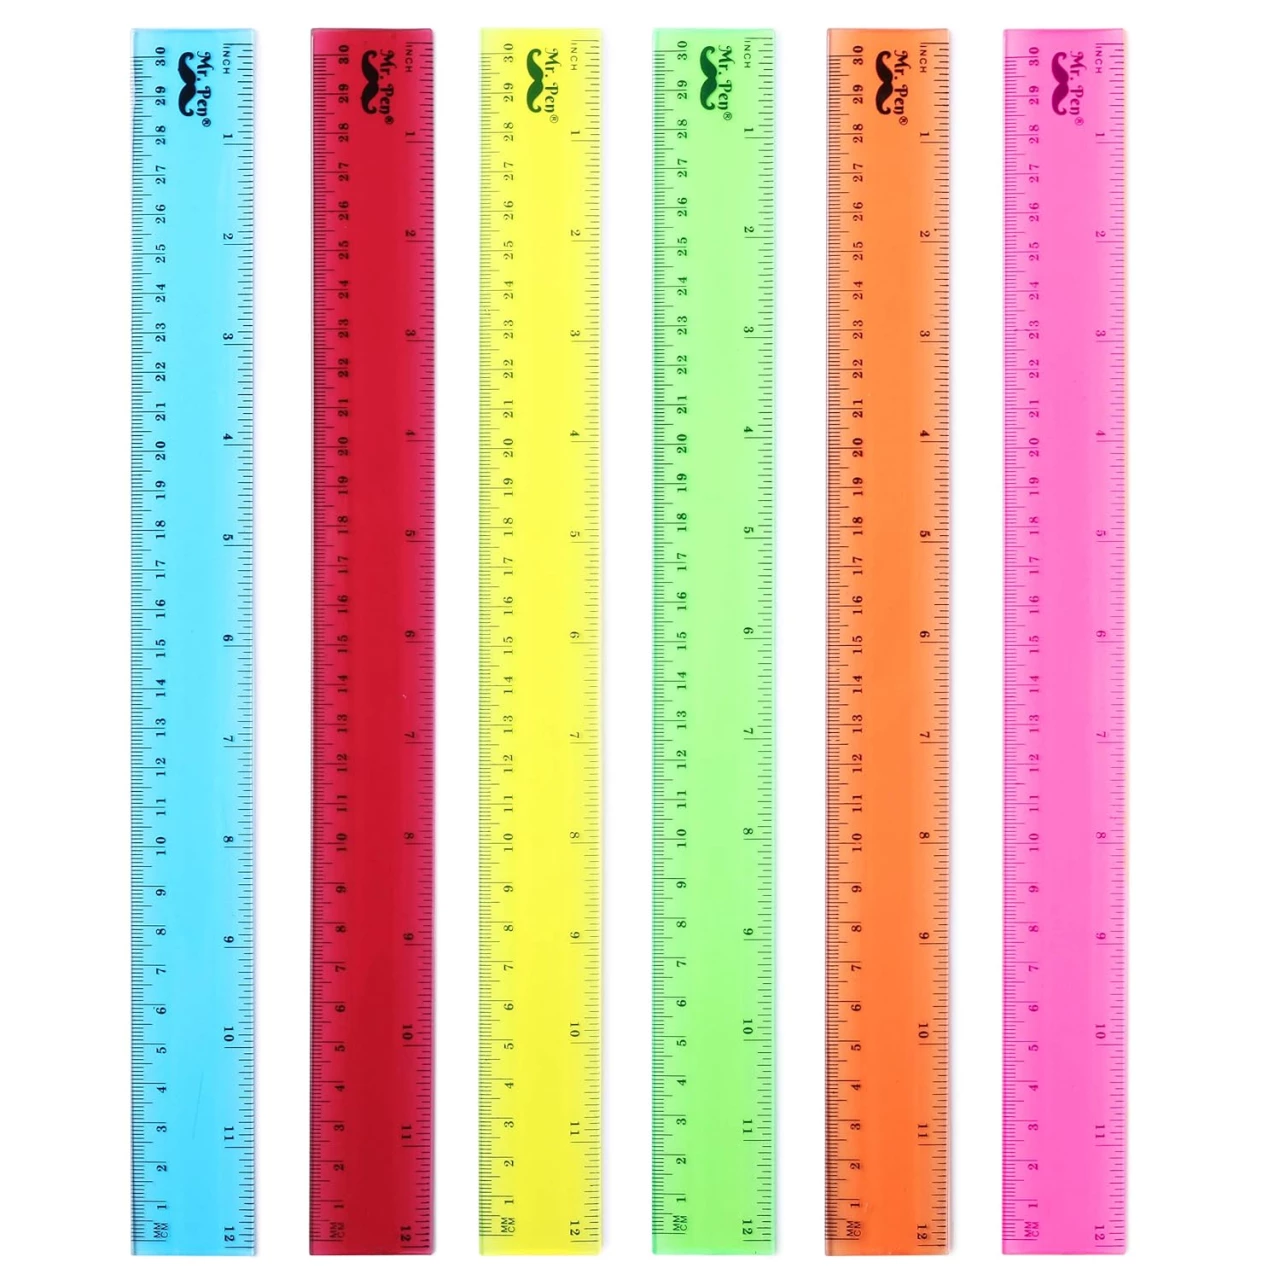 Mr. Pen- 12 Inch, 6 Pack, Assorted Colors, Kids Ruler for School with Centimeters and Inches, Plastic Standard Ruler, Clear